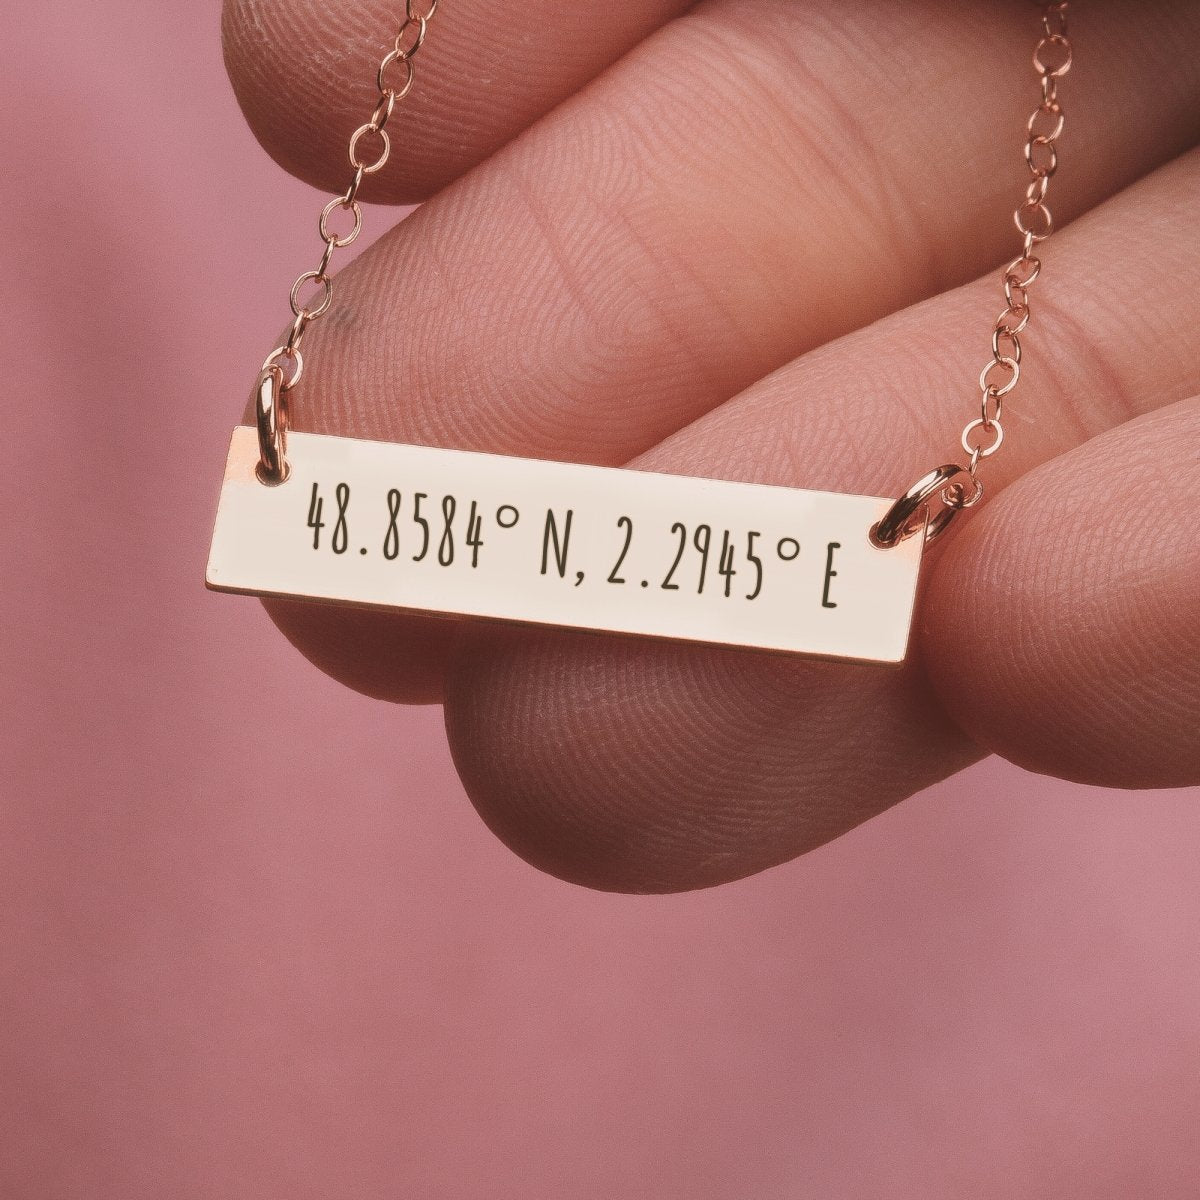 Personalized Coordinates Bar Necklace - Melanie Golden Jewelry - bar necklaces, bestseller, bridesmaid, Engraved Jewelry, love, motherhood, necklace, personalized, personalized necklace, VALENTINES, wedding, wedding party